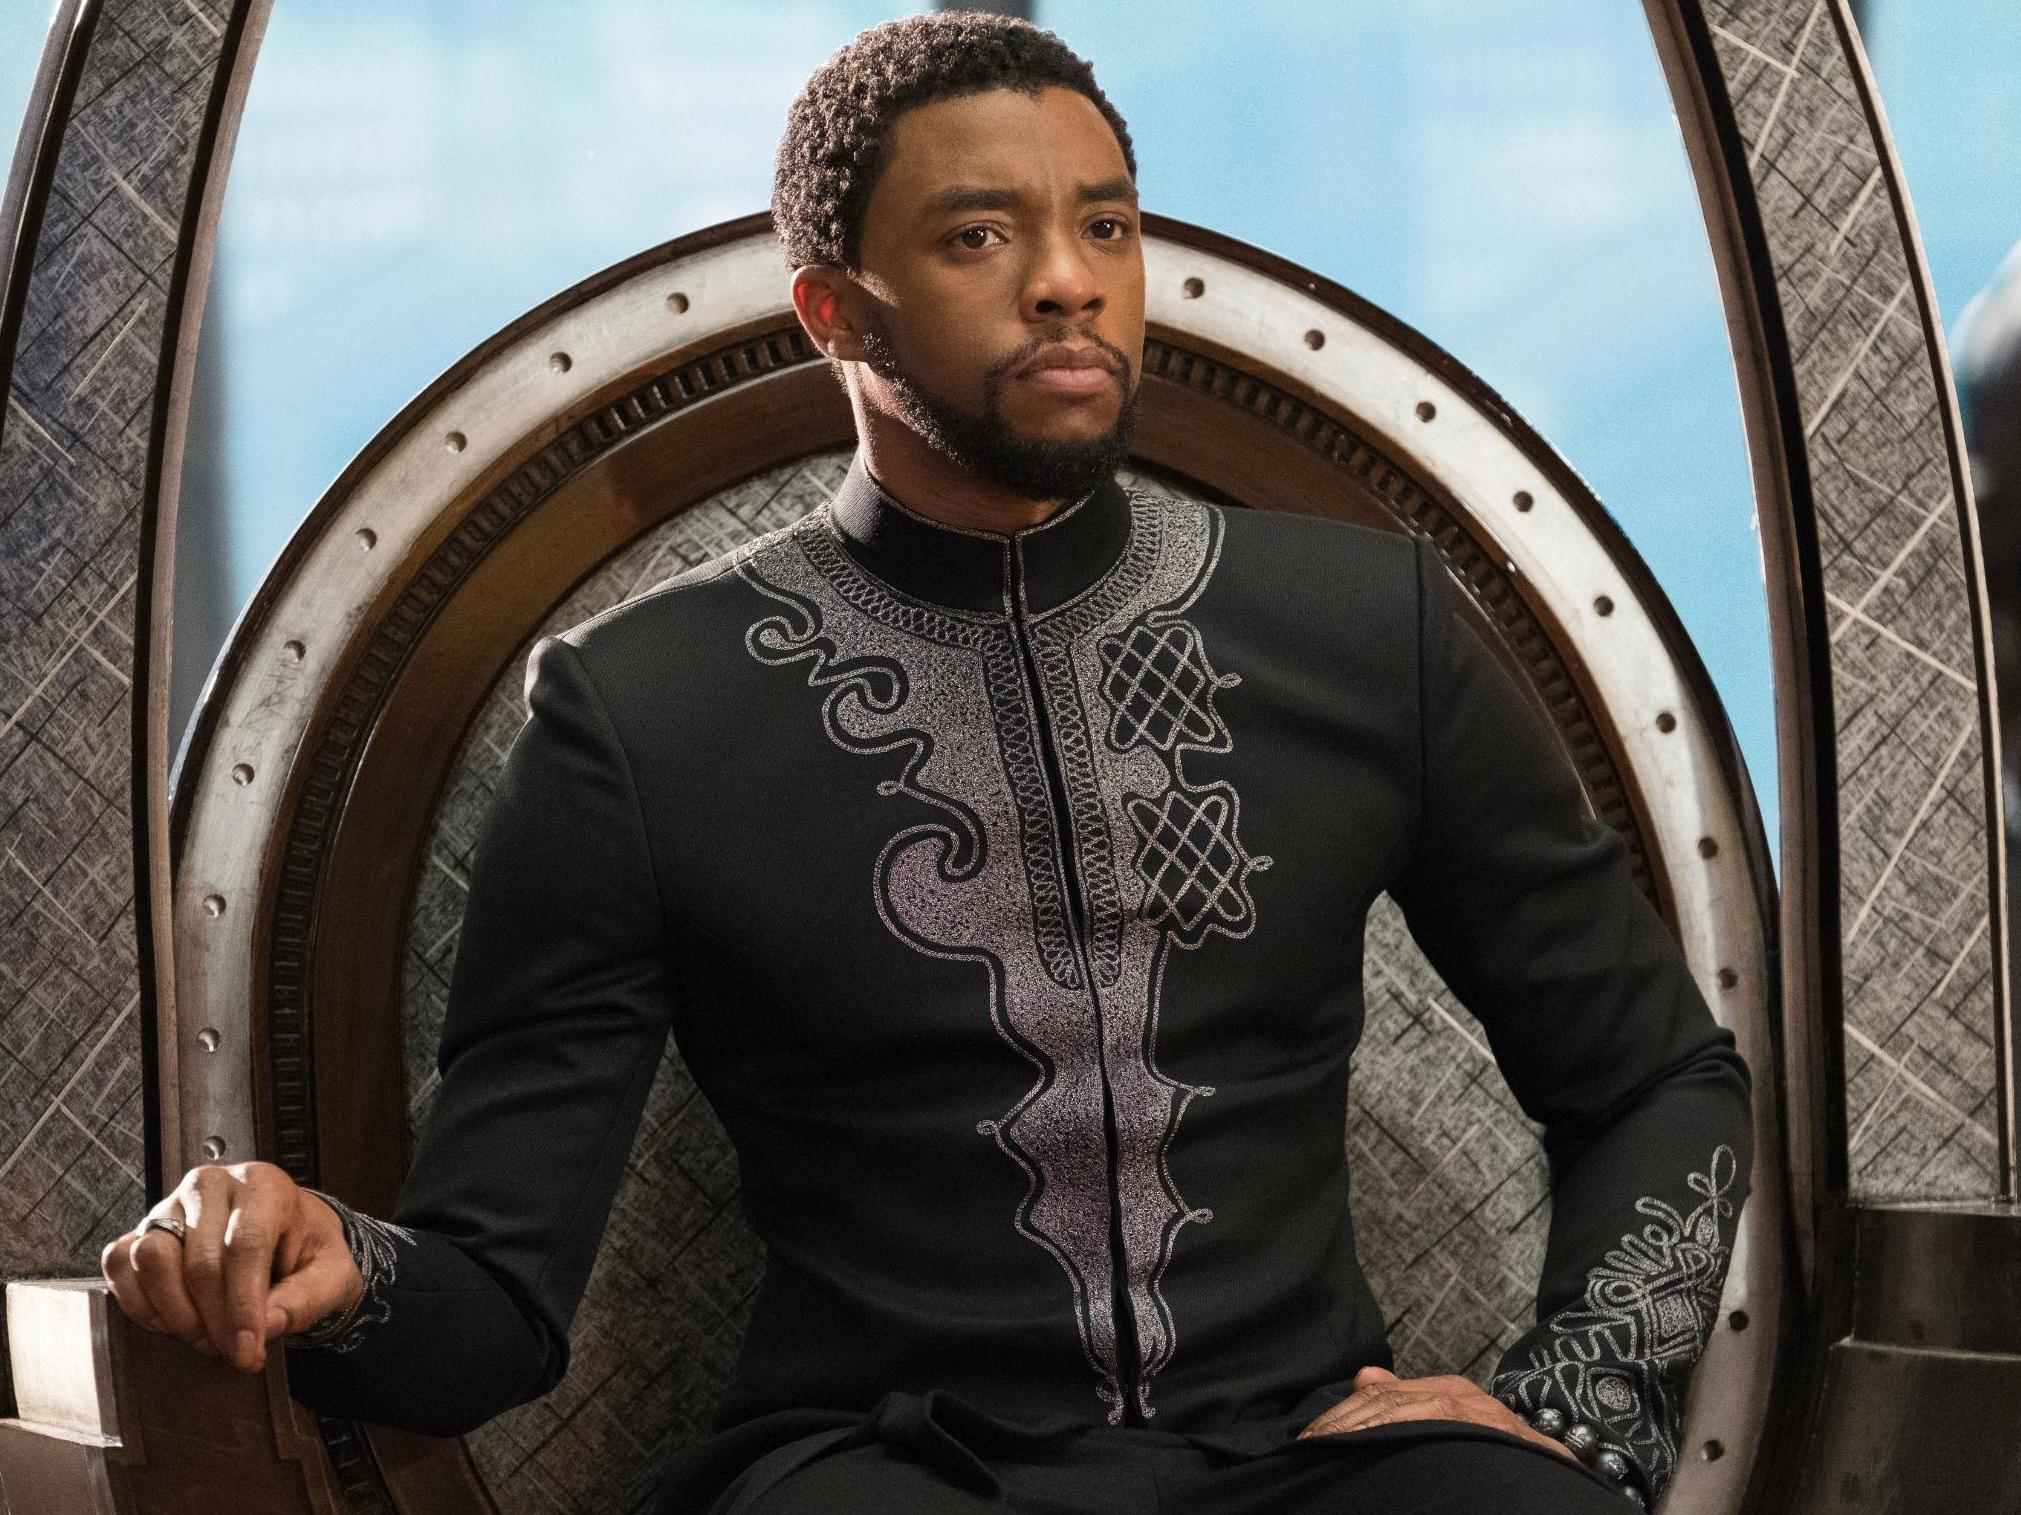 T’Challa (Chadwick Boseman) is at the centre of a story that illustrates a nuanced, layered commentary on colonialism and black identity